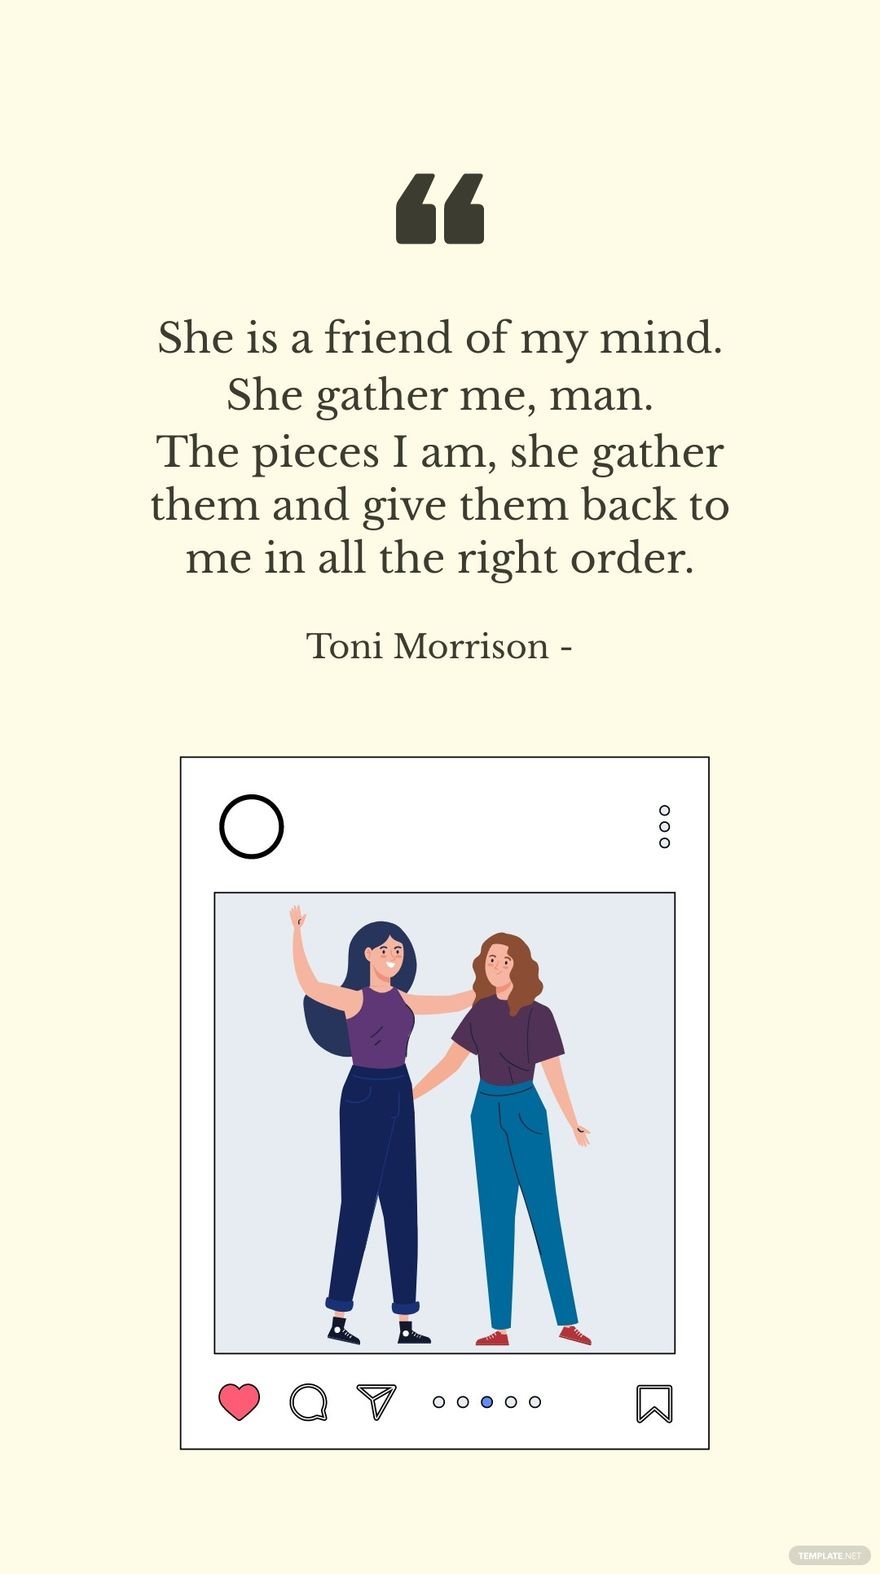 Toni Morrison - She is a friend of my mind. She gather me, man. The pieces I am, she gather them and give them back to me in all the right order.